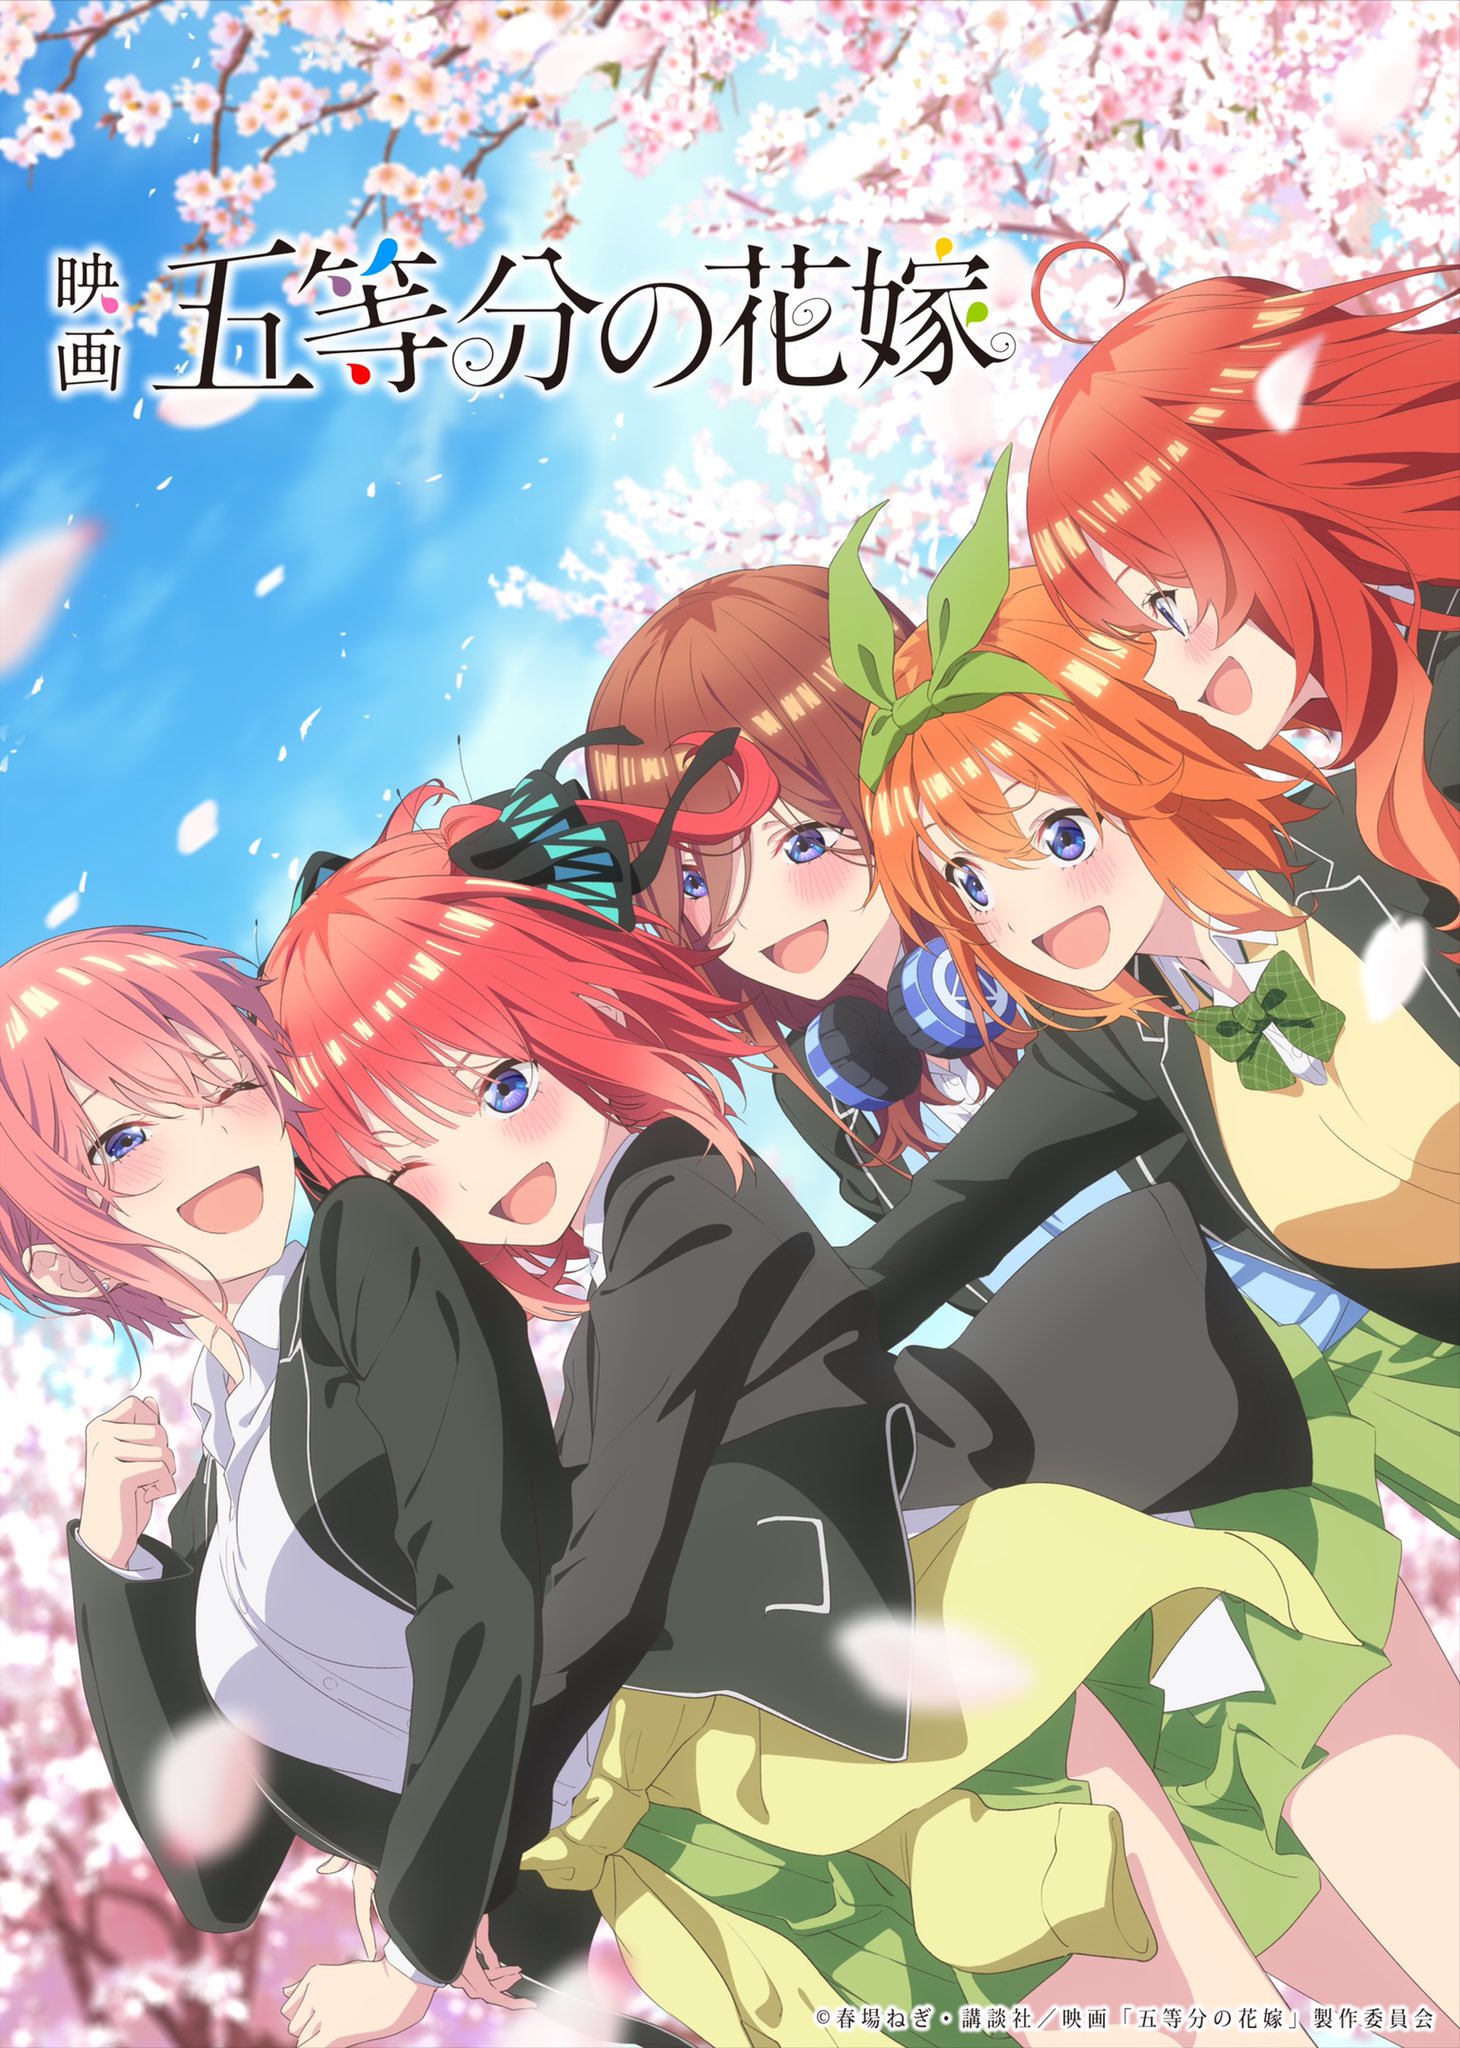 3rd key visual for The Quintessential Quintuplets anime film